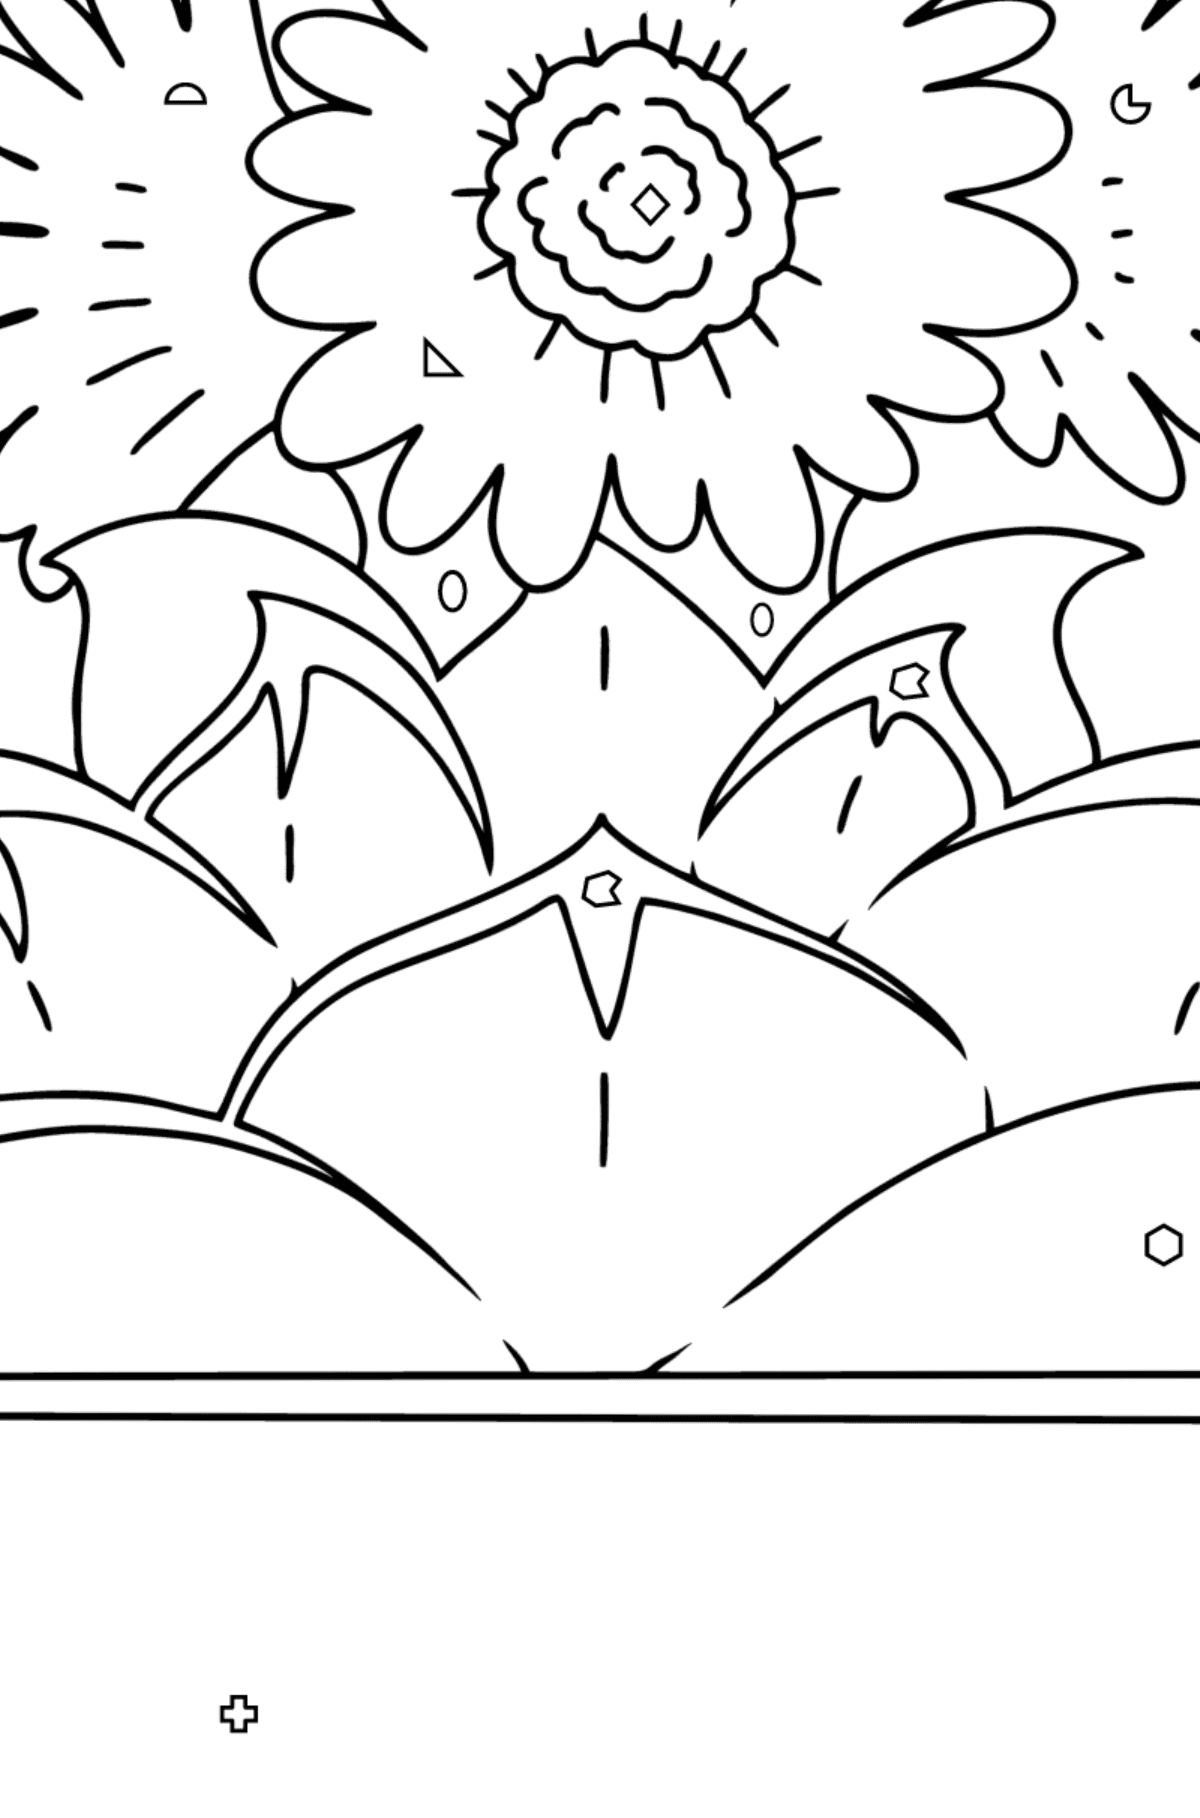 Echinocactus Grusonii coloring page - Coloring by Geometric Shapes for Kids